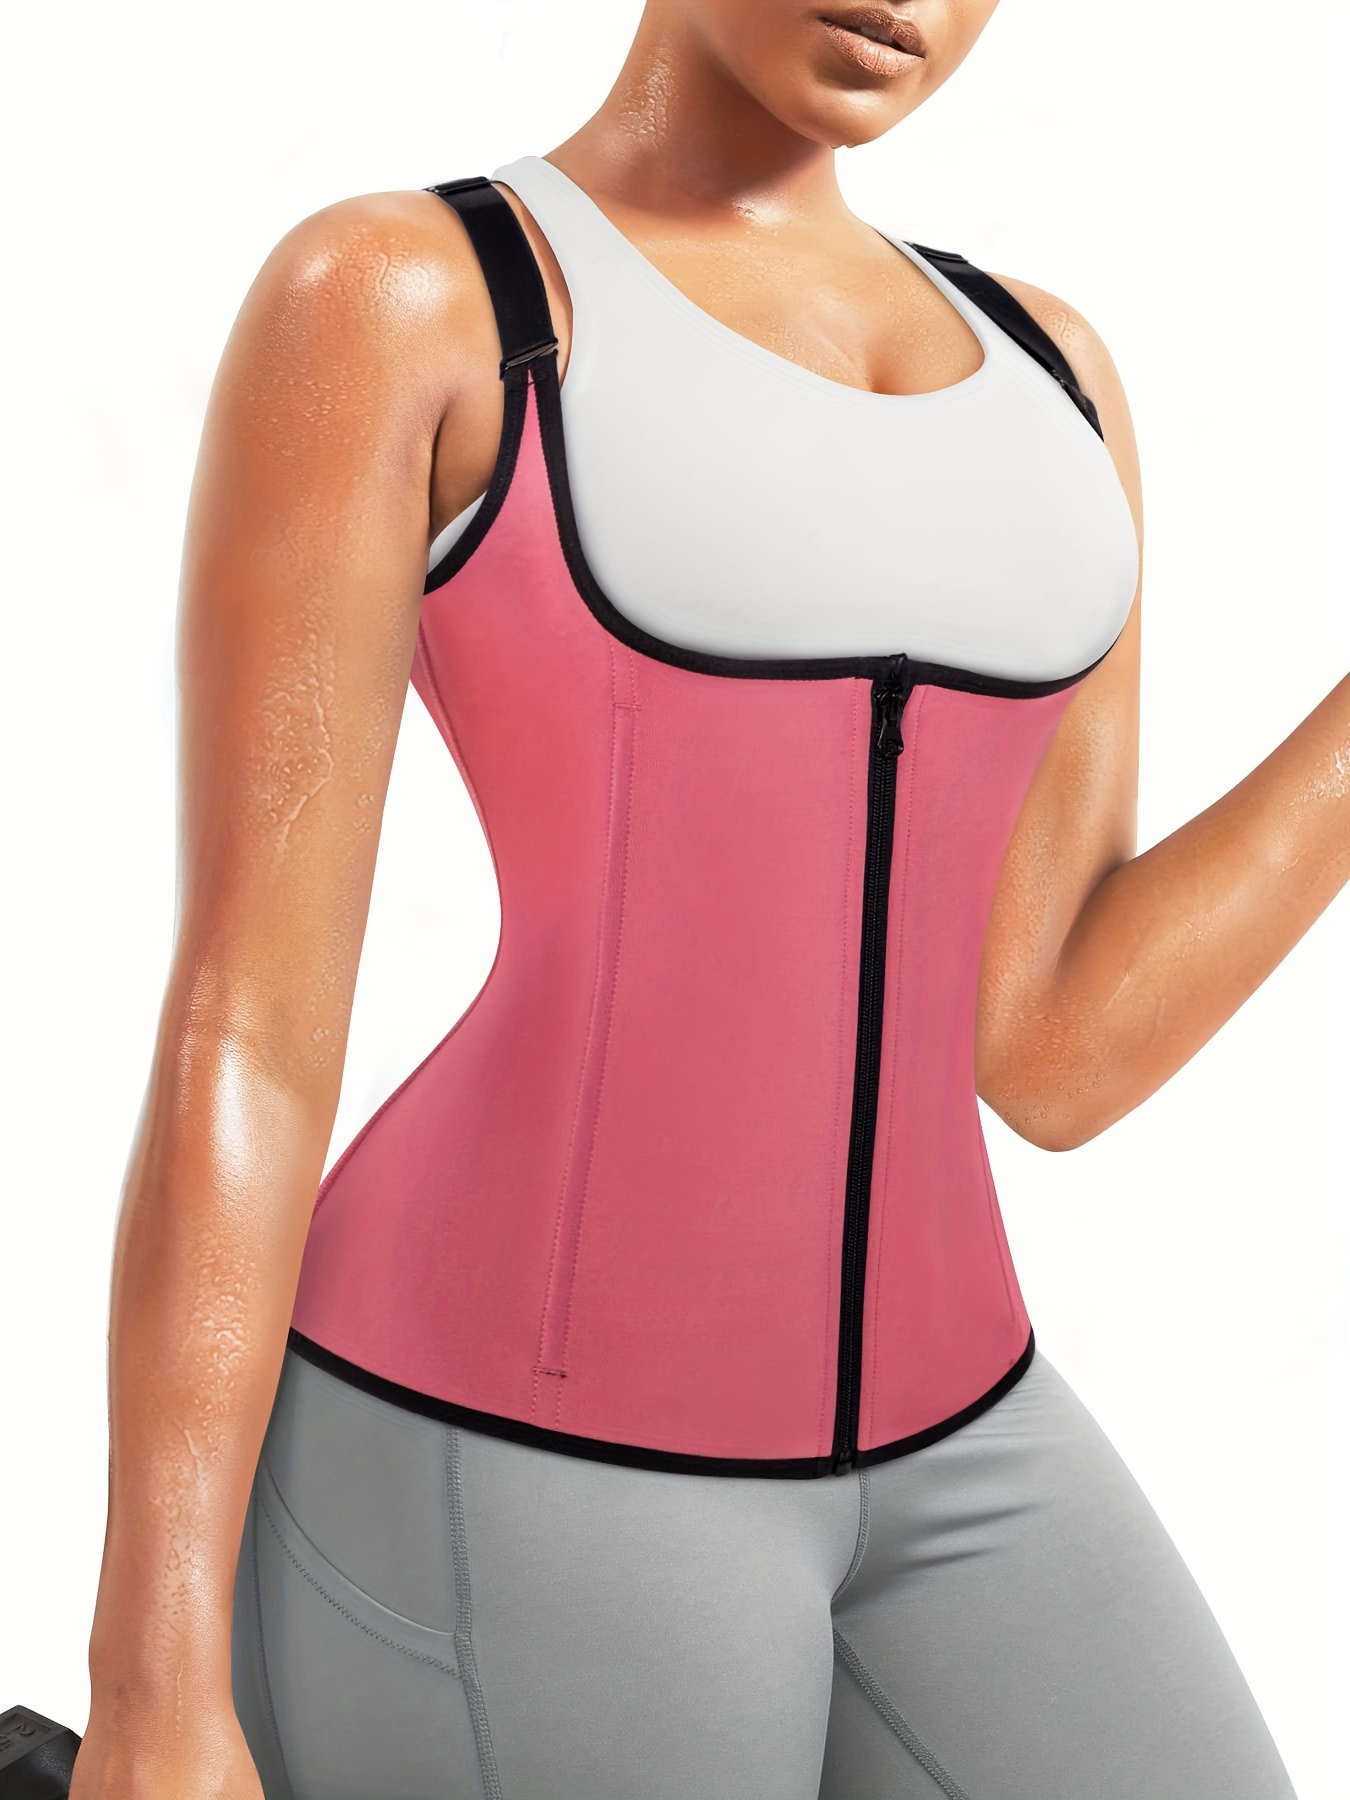 Womens Compression Takealot Body Shaper With Padded Cups For Tummy Control  And Slimming Slim Trainer Corset Vest From Nian06, $11.63